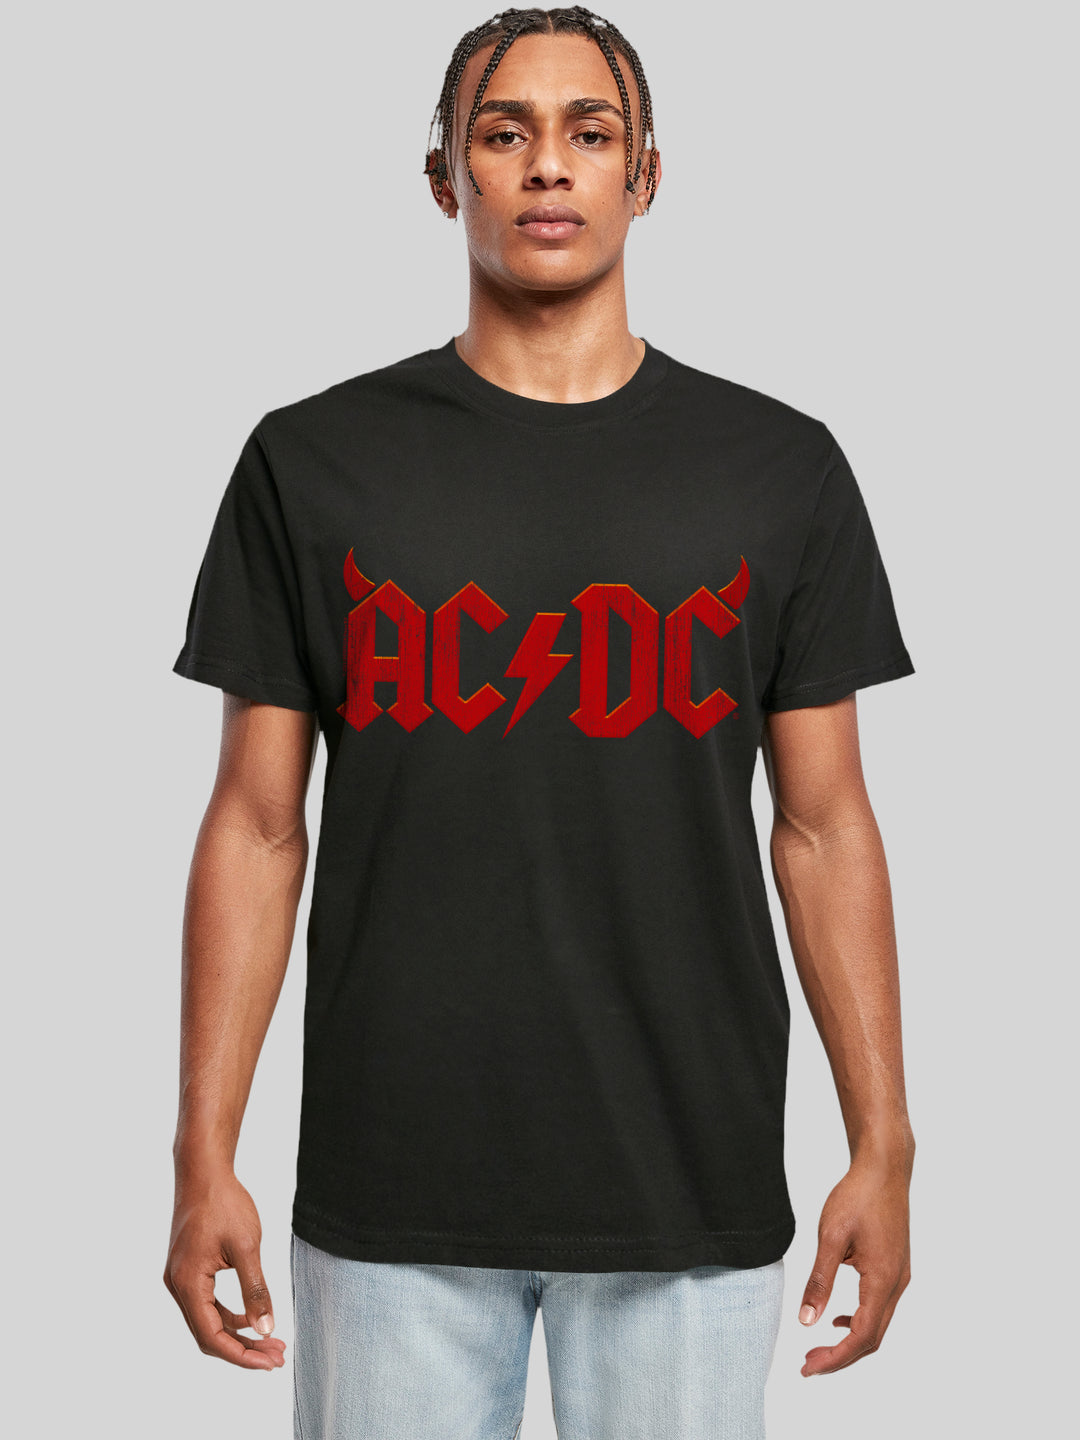 ACDC Horns Logo with T-Shirt Round Neck